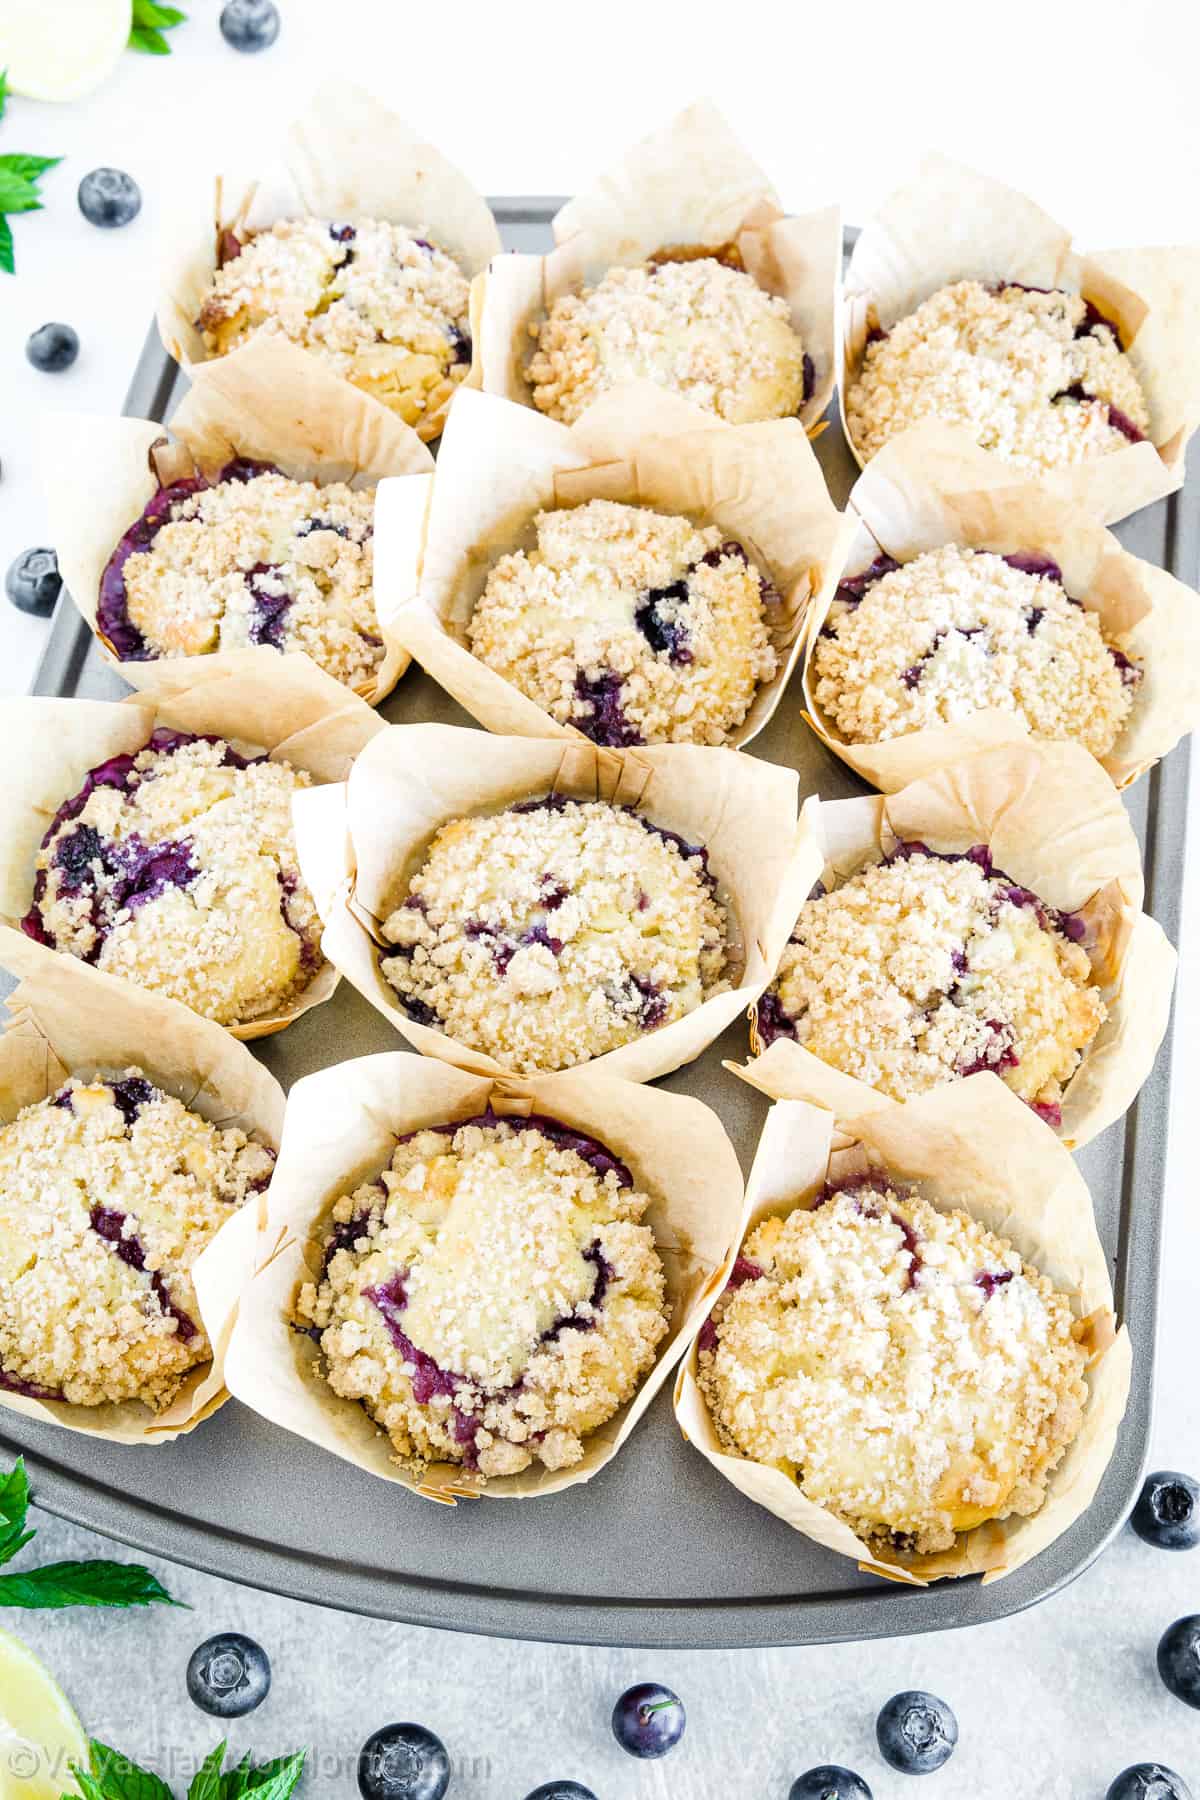 These muffins are a type of baked good that typically consists of a moist, sweetened batter studded with fresh or frozen blueberries. 